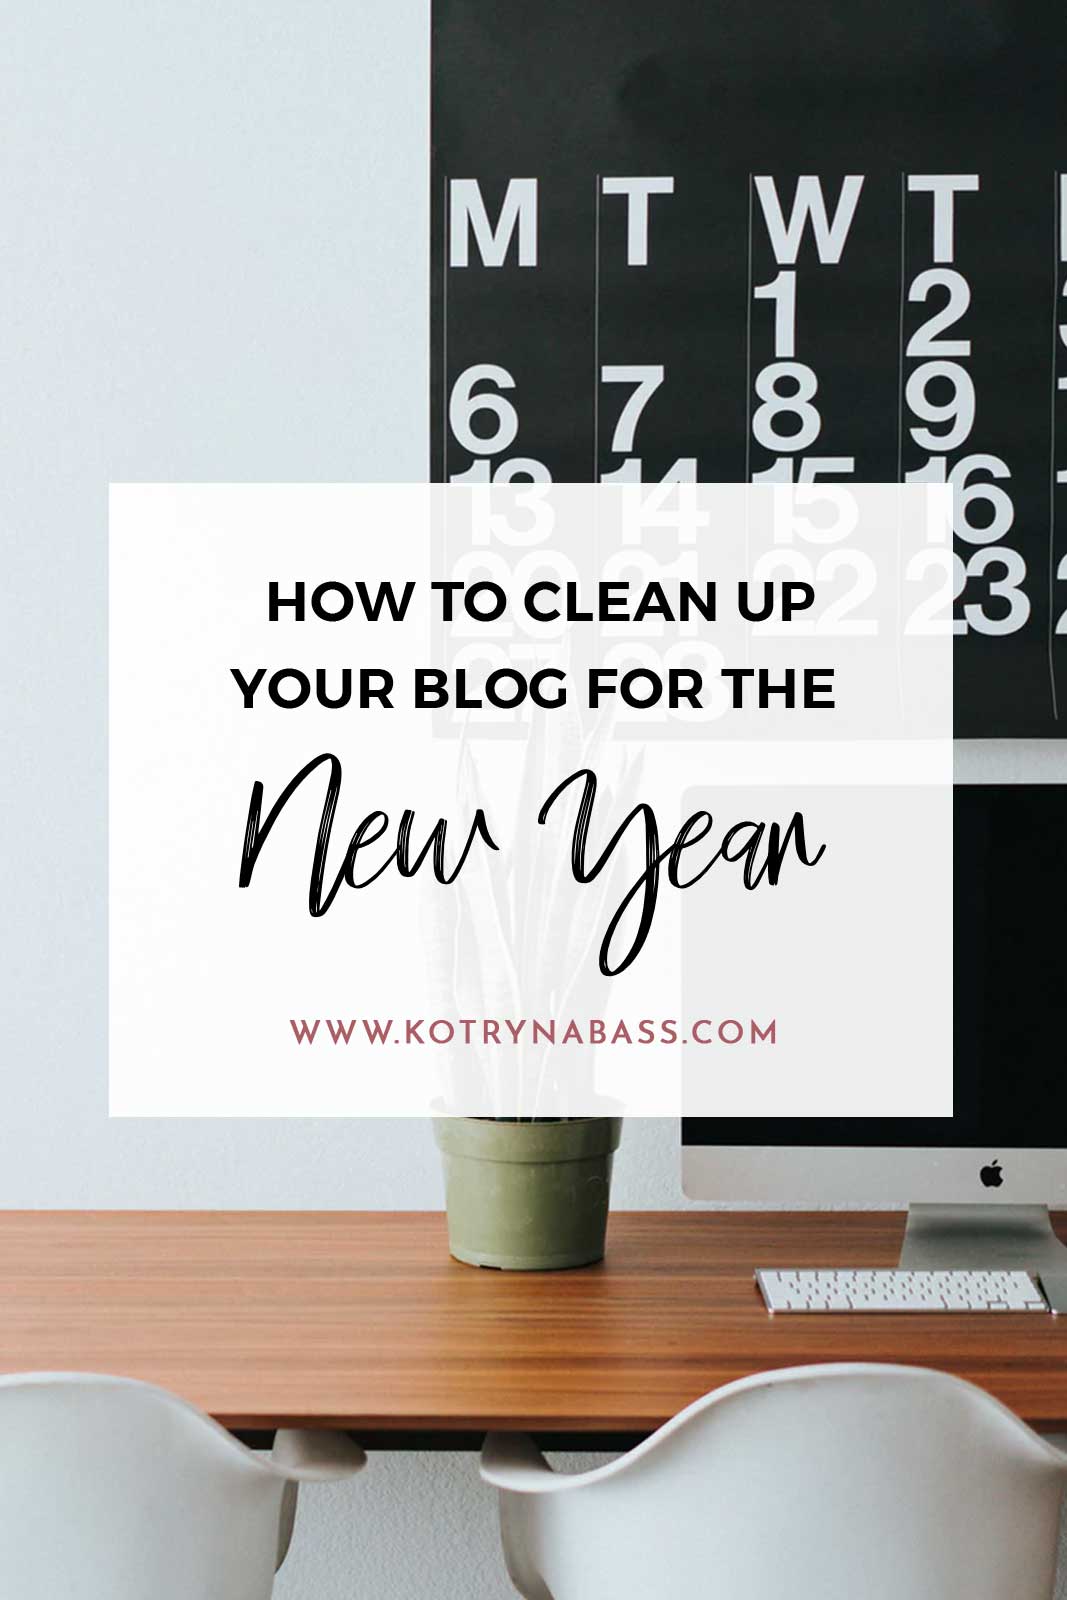 Can you believe we only have a few weeks left until 2018? Woaaah! It’s just about time to start getting ready to conquer the new year & I’m here to help! Here are some ways to clean up your blog for the new year!